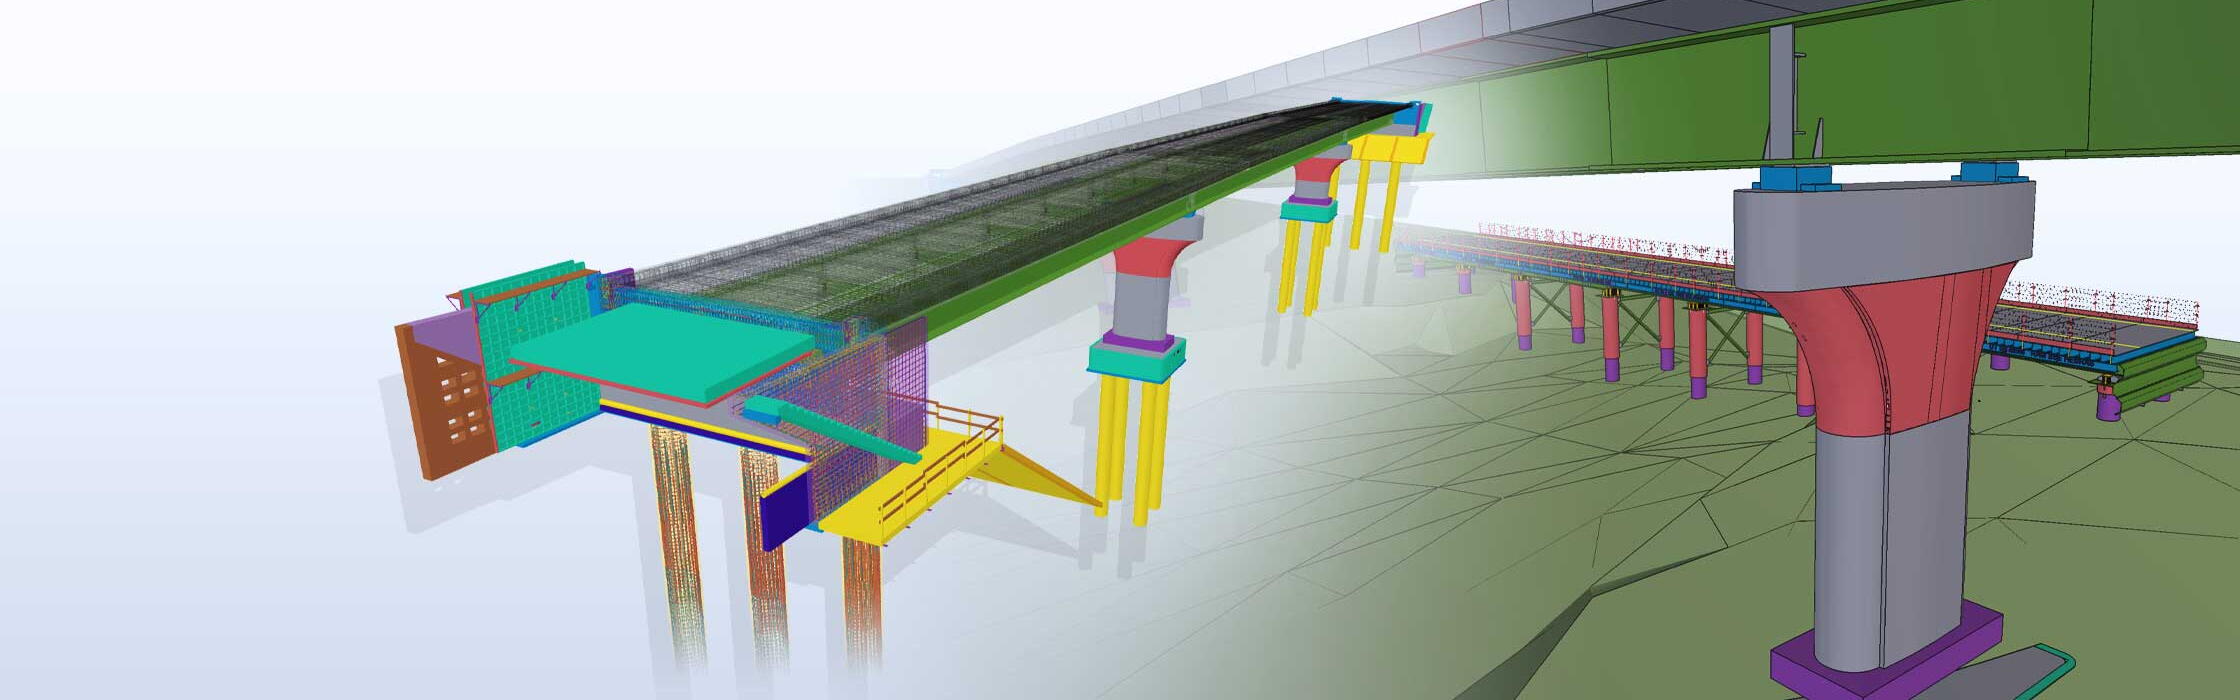 See it before you build it. Avoid costly mistakes with an interactive virtual 3D model.